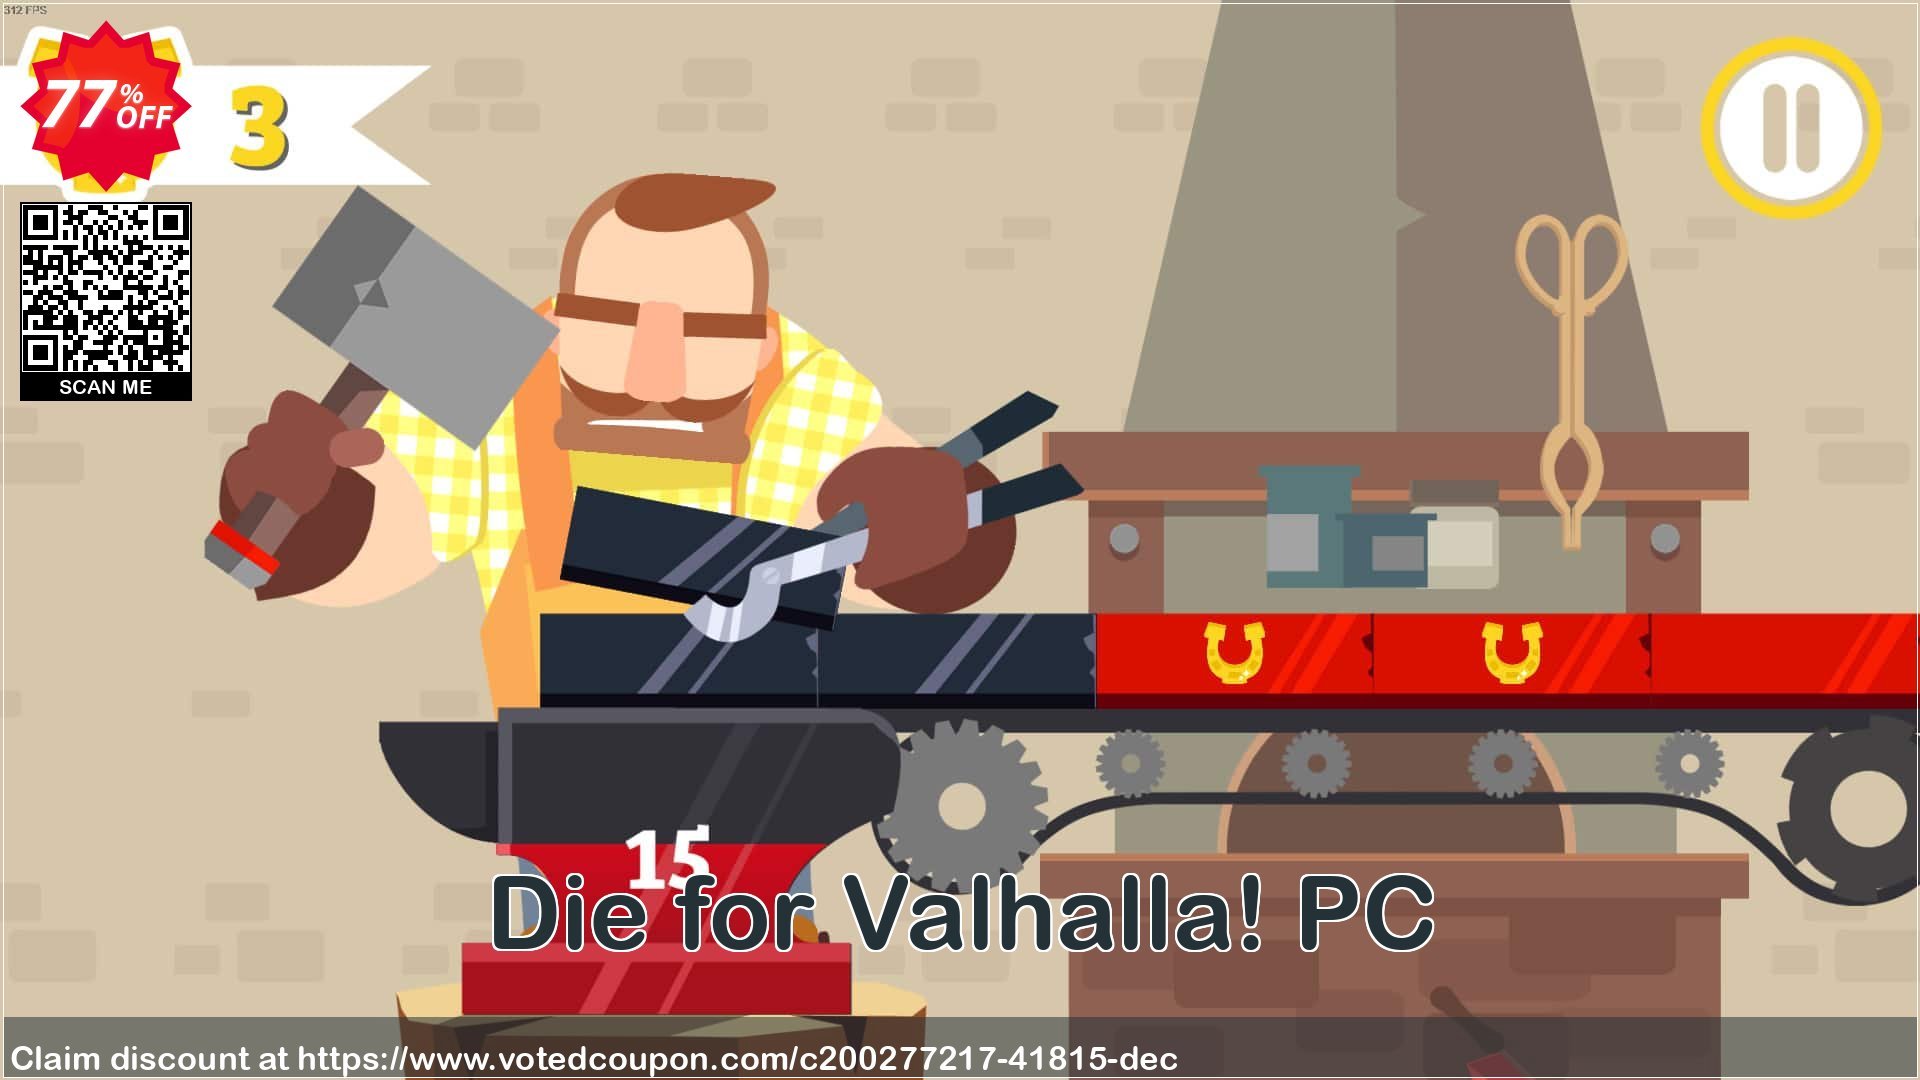 Die for Valhalla! PC Coupon Code May 2024, 77% OFF - VotedCoupon